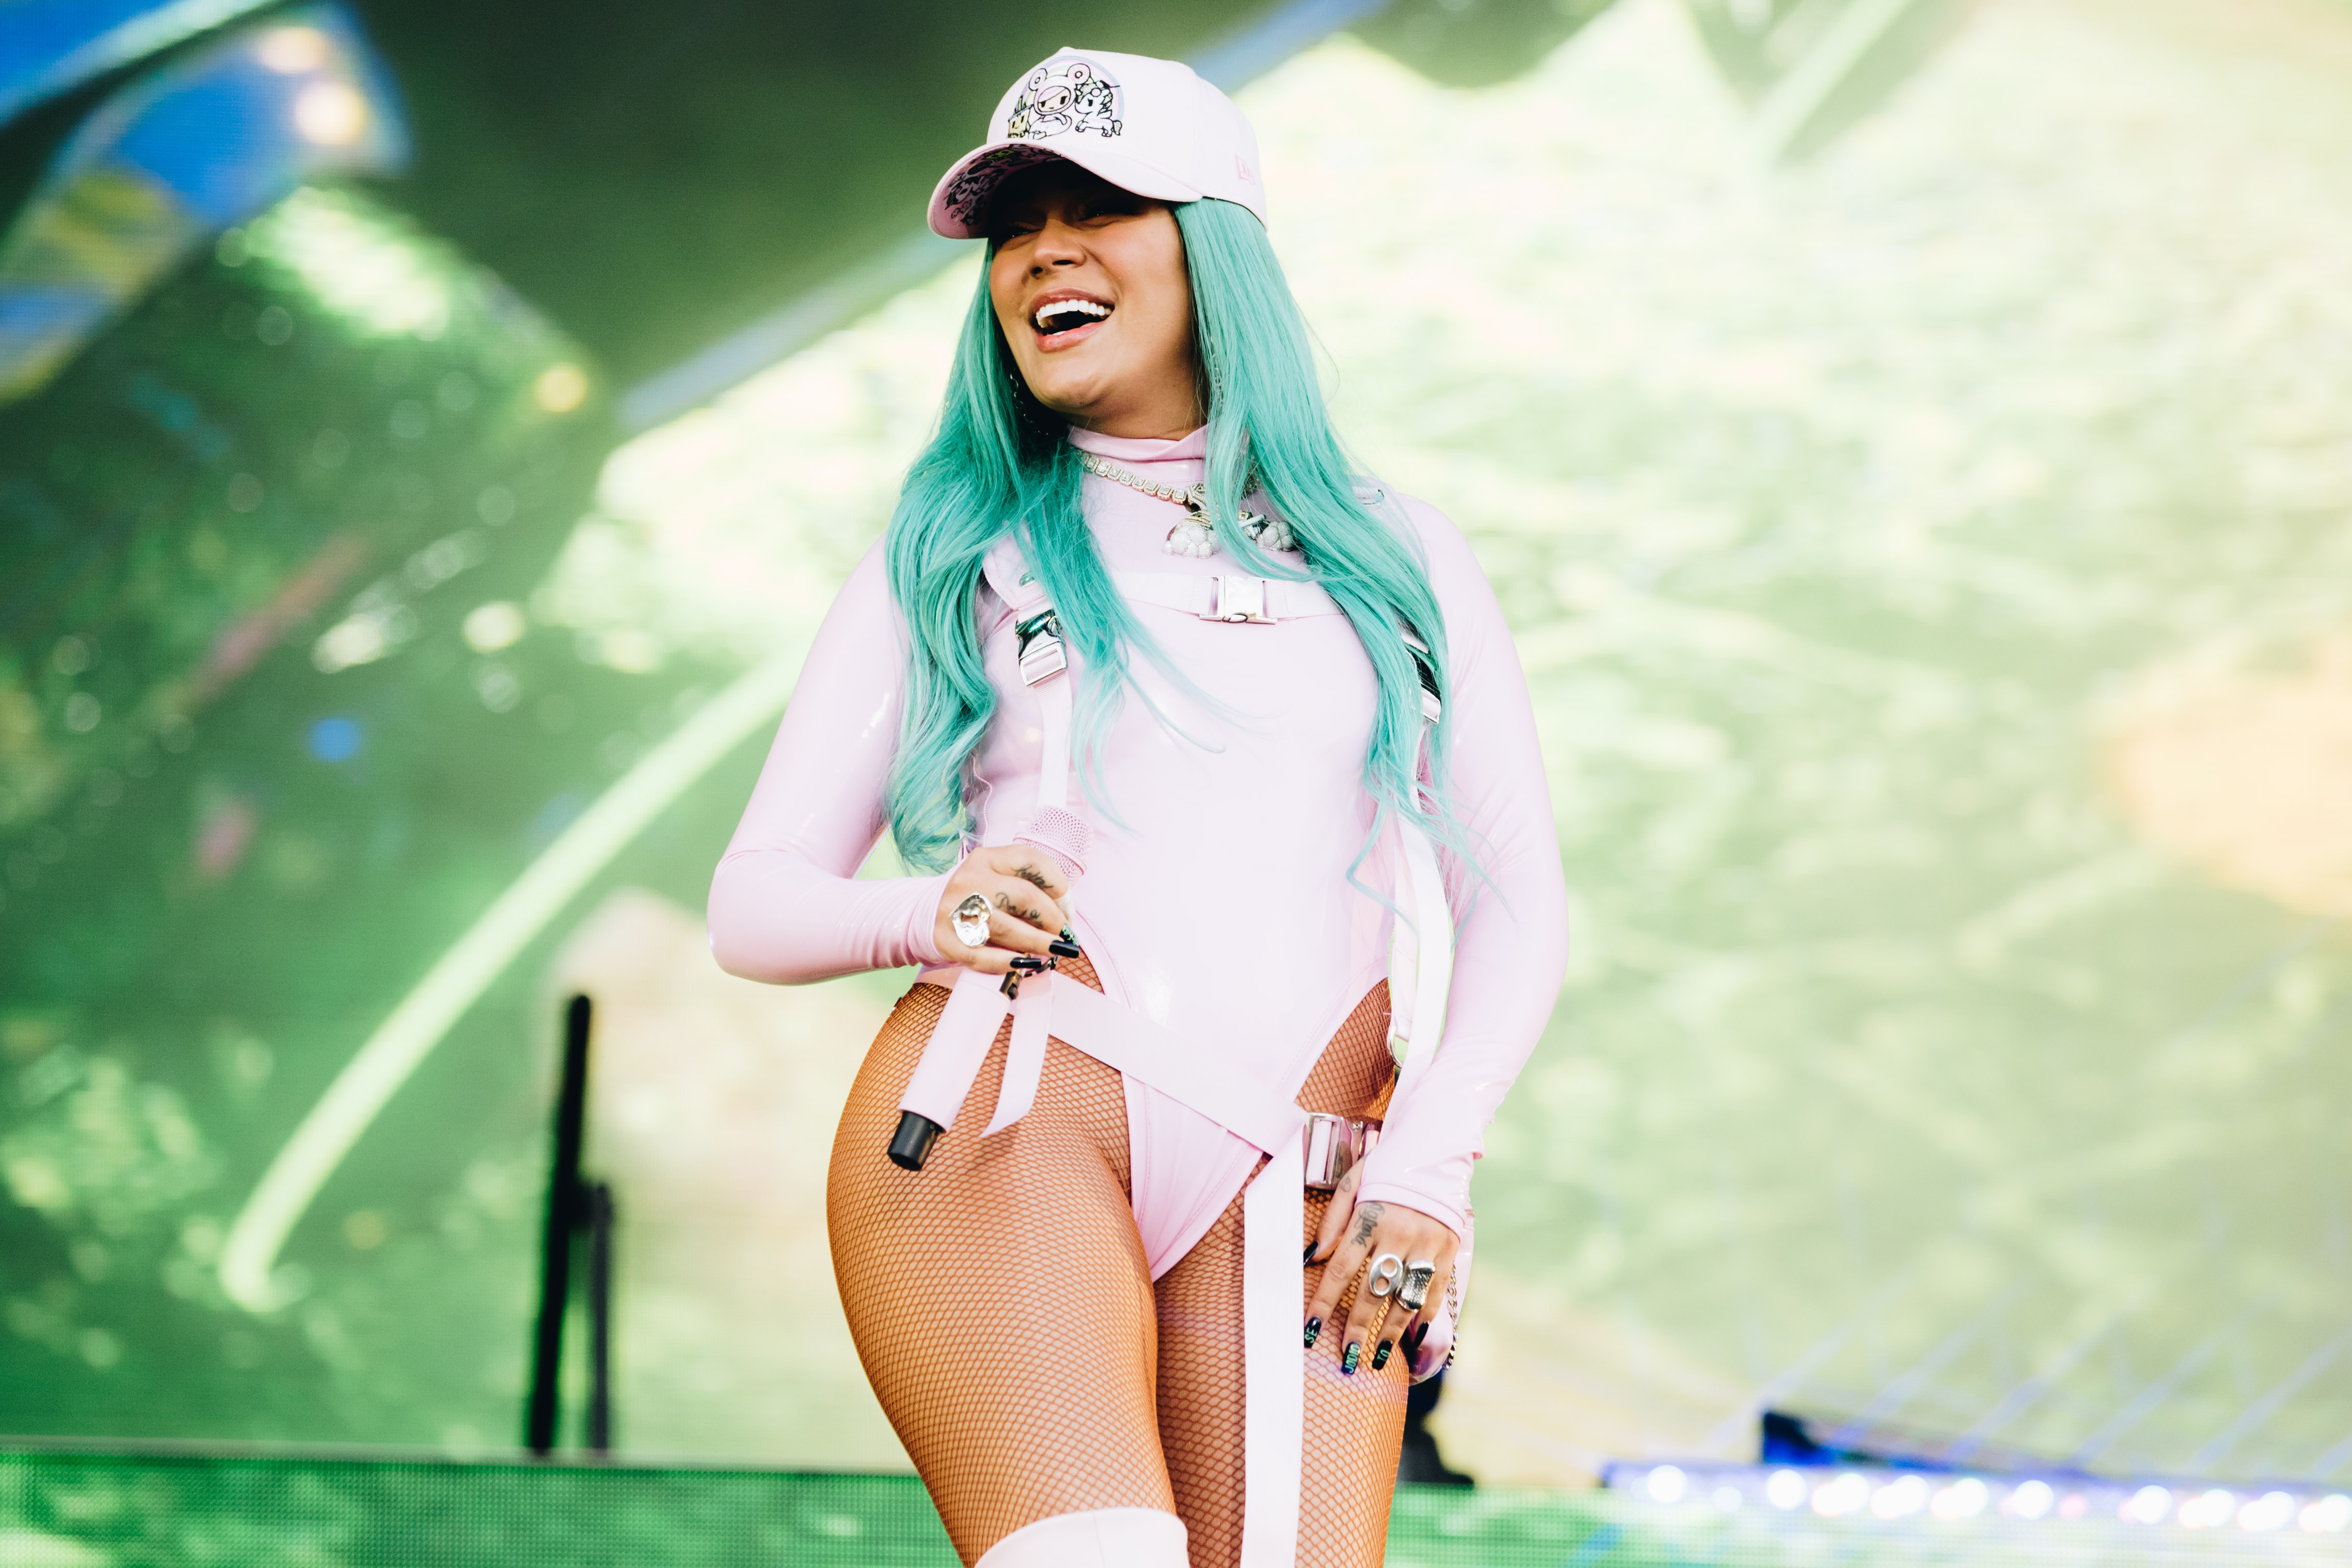 AUSTIN, TEXAS - OCTOBER 03: Karol G performs onstage during Austin City Limits Festival at Zilker Park on October 03, 2021 in Austin, Texas. (Photo by Rich Fury/Getty Images)